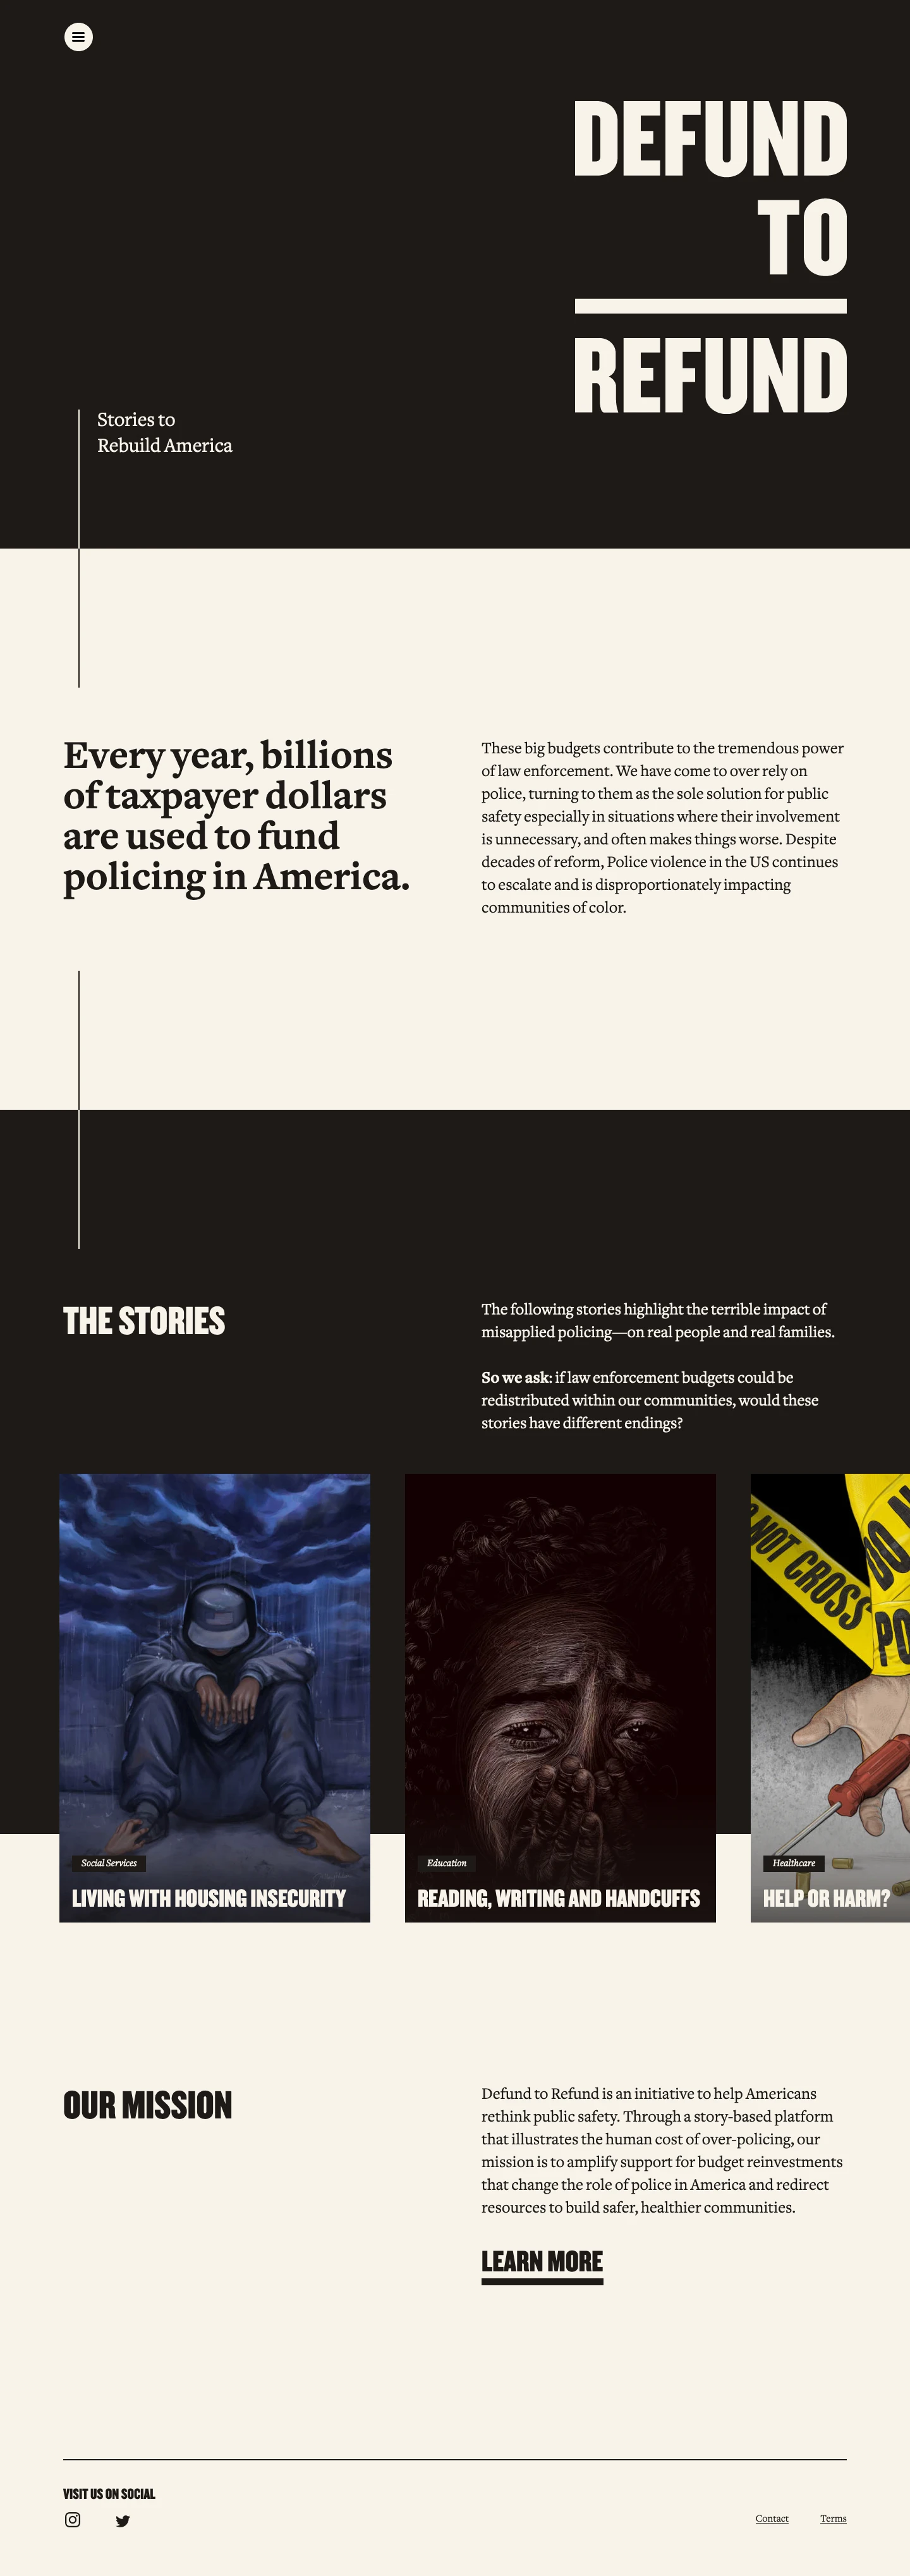 Defund to Refund Landing Page Example: Defund to Refund is an initiative to help Americans rethinking public safety by amplifying support for budget reinvestments away from police and into our communities.